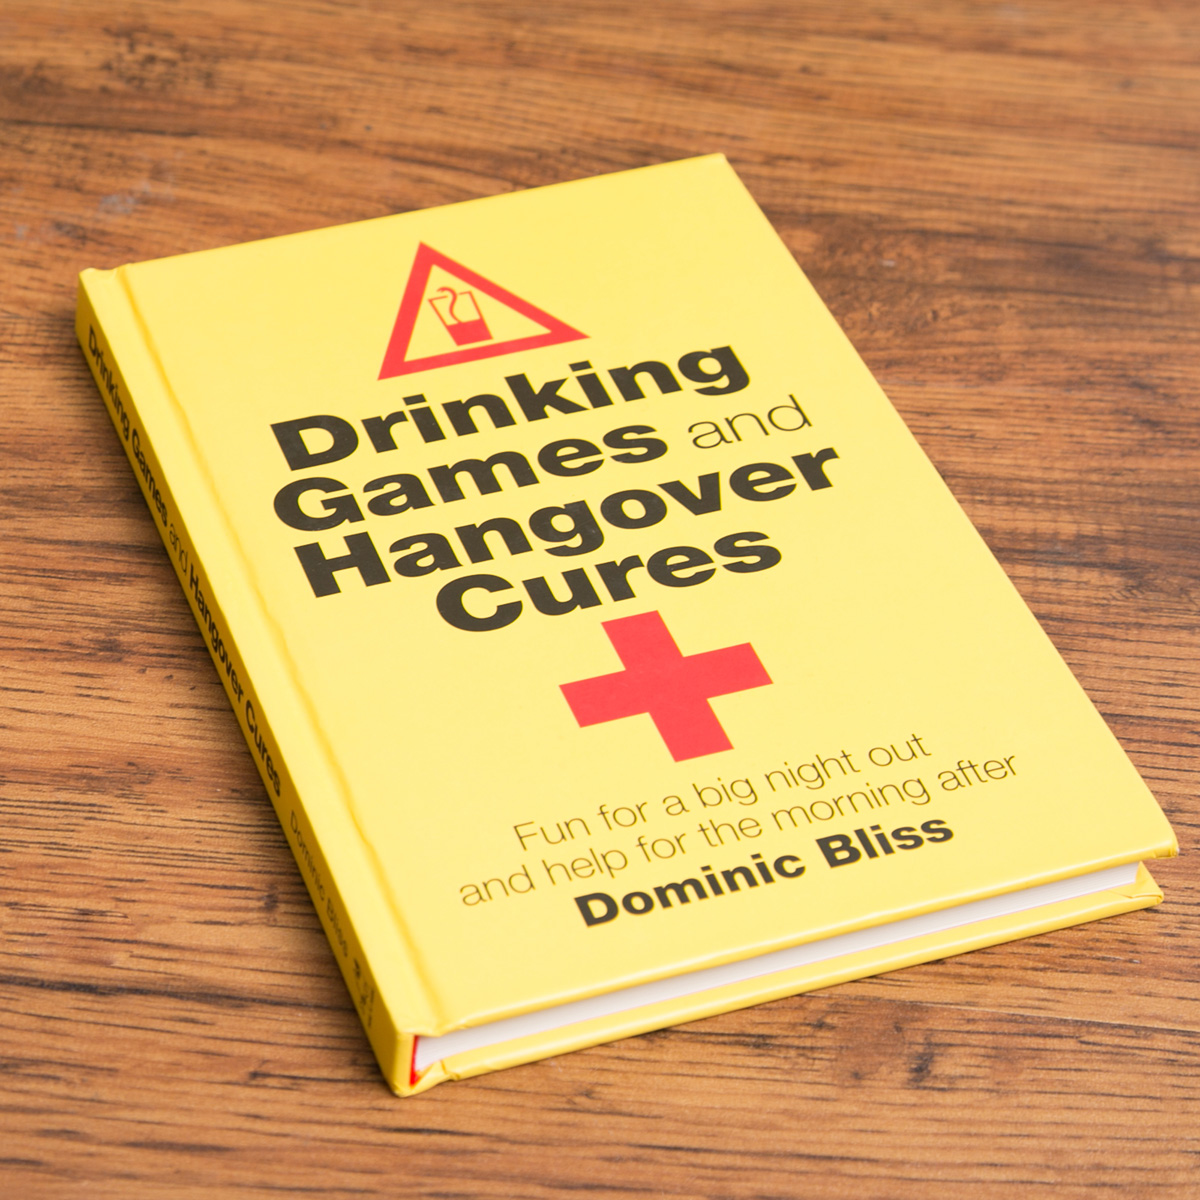 Drinking Games & Hangover Cures Book - 18th gift